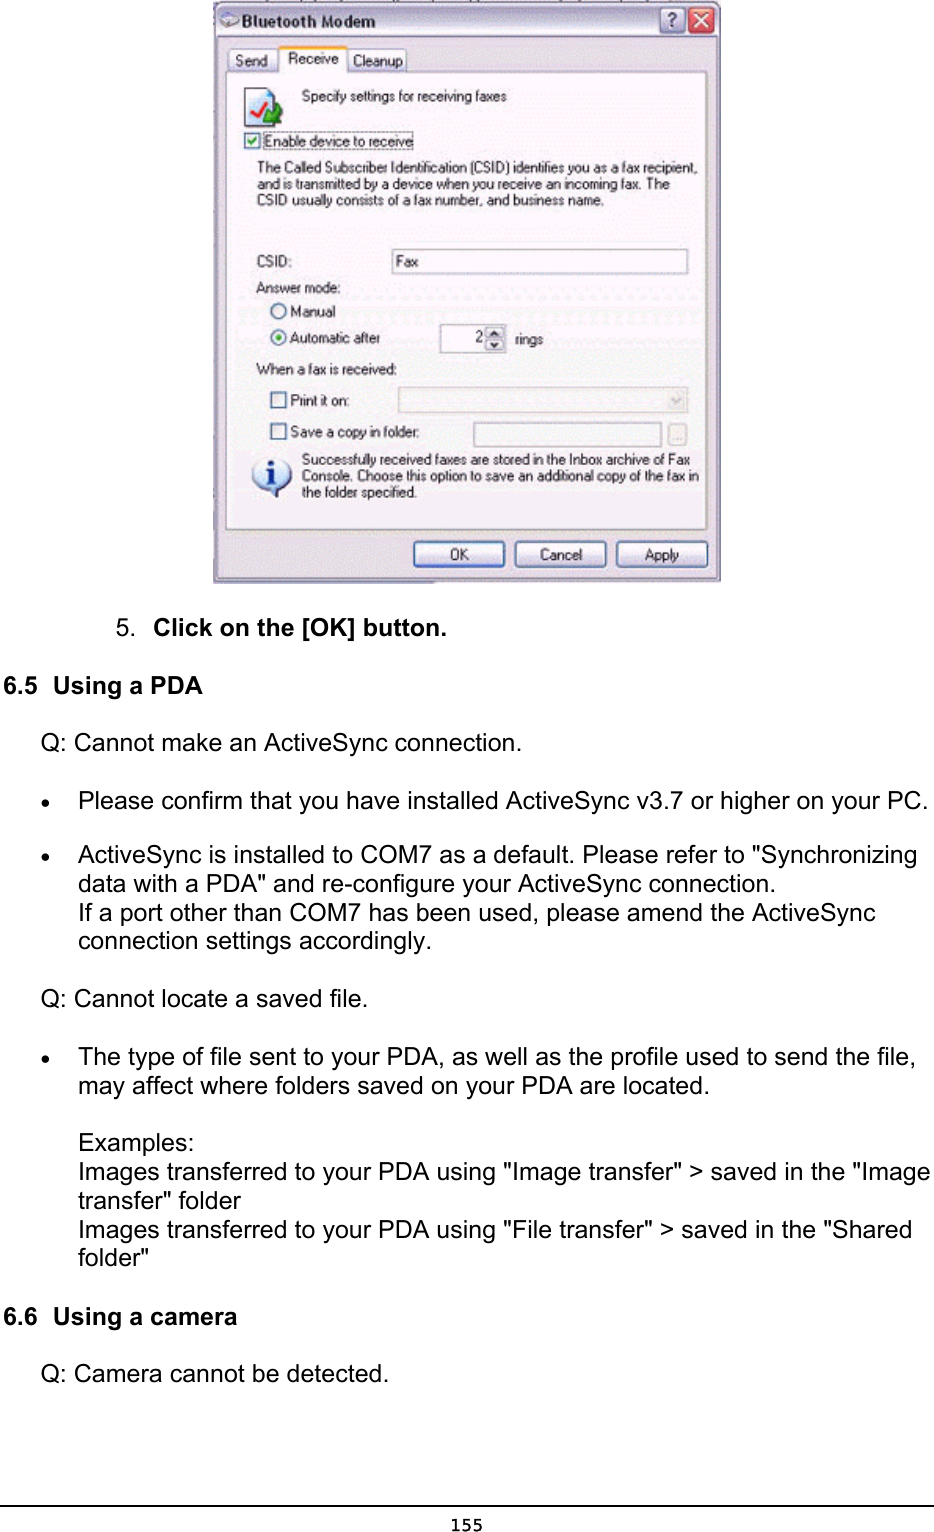   5.  Click on the [OK] button. 6.5  Using a PDA Q: Cannot make an ActiveSync connection. •  Please confirm that you have installed ActiveSync v3.7 or higher on your PC. •  ActiveSync is installed to COM7 as a default. Please refer to &quot;Synchronizing data with a PDA&quot; and re-configure your ActiveSync connection. If a port other than COM7 has been used, please amend the ActiveSync connection settings accordingly. Q: Cannot locate a saved file. •  The type of file sent to your PDA, as well as the profile used to send the file, may affect where folders saved on your PDA are located.  Examples: Images transferred to your PDA using &quot;Image transfer&quot; &gt; saved in the &quot;Image transfer&quot; folder Images transferred to your PDA using &quot;File transfer&quot; &gt; saved in the &quot;Shared folder&quot;  6.6  Using a camera Q: Camera cannot be detected.  155